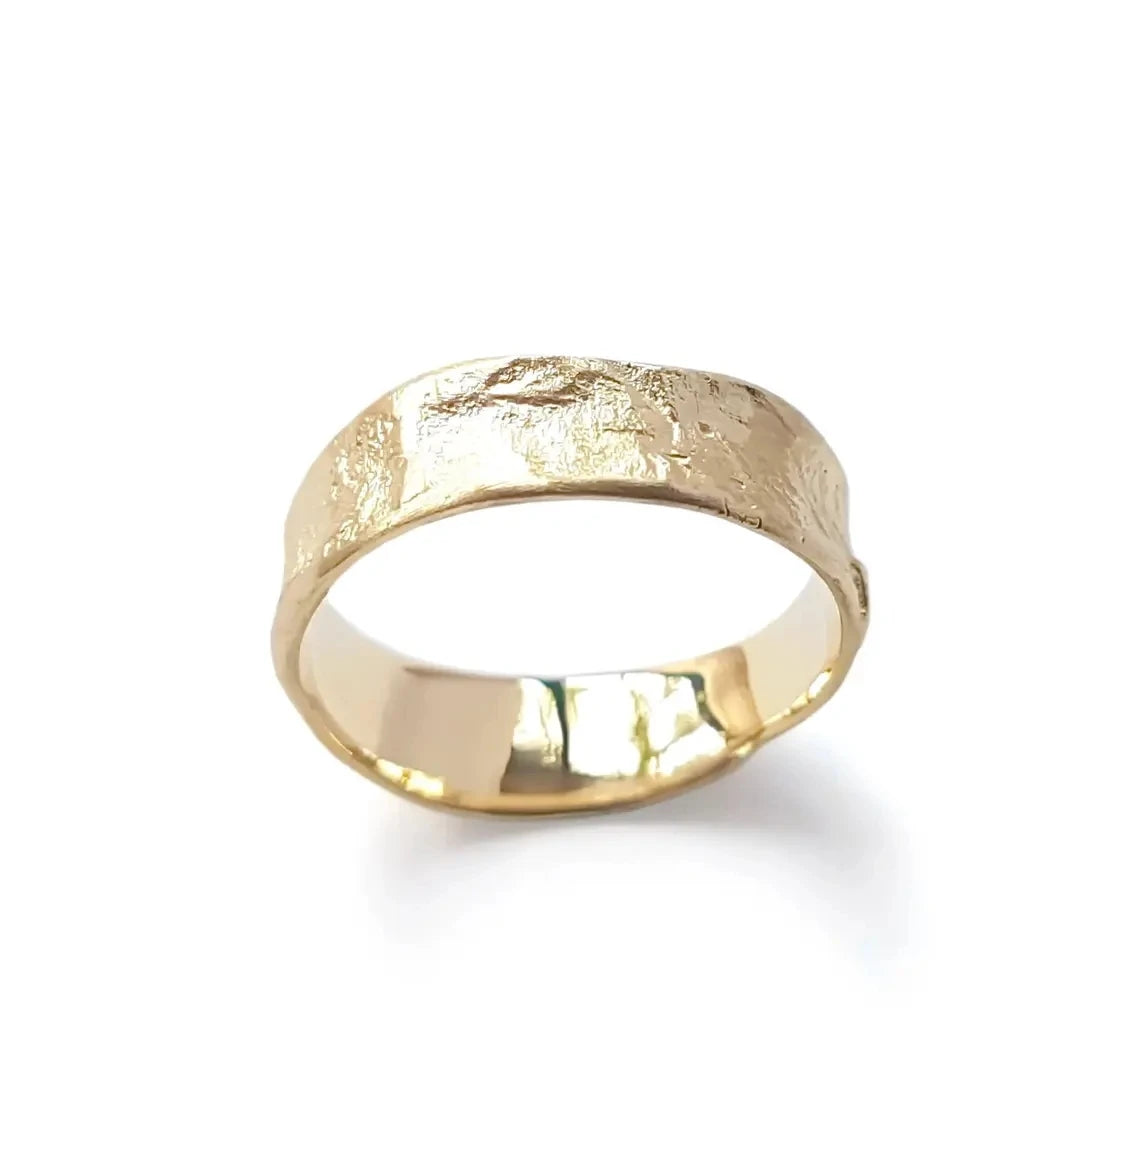 Hammered Gold Band Men's Ring in 14K Yellow Gold